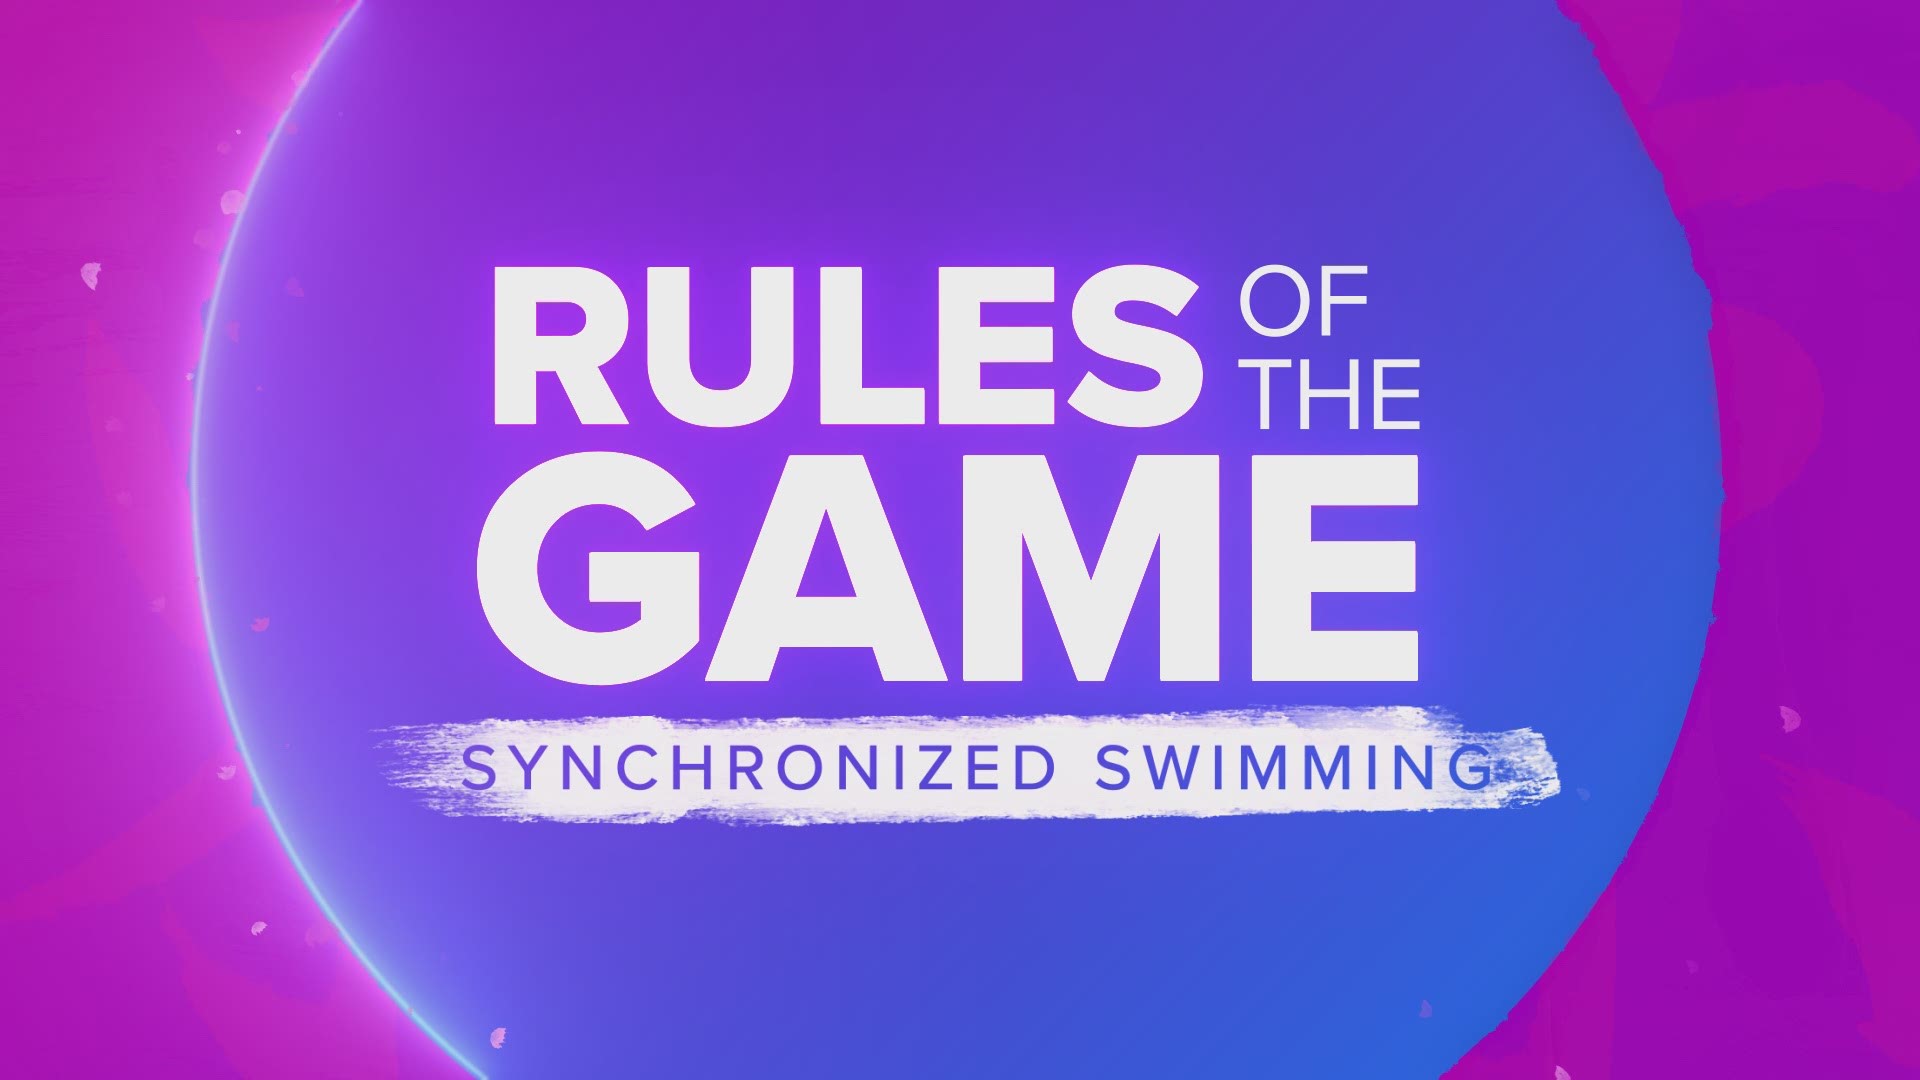 Synchronized swimming is the figure skating of the Summer Olympics. Here's how it works.